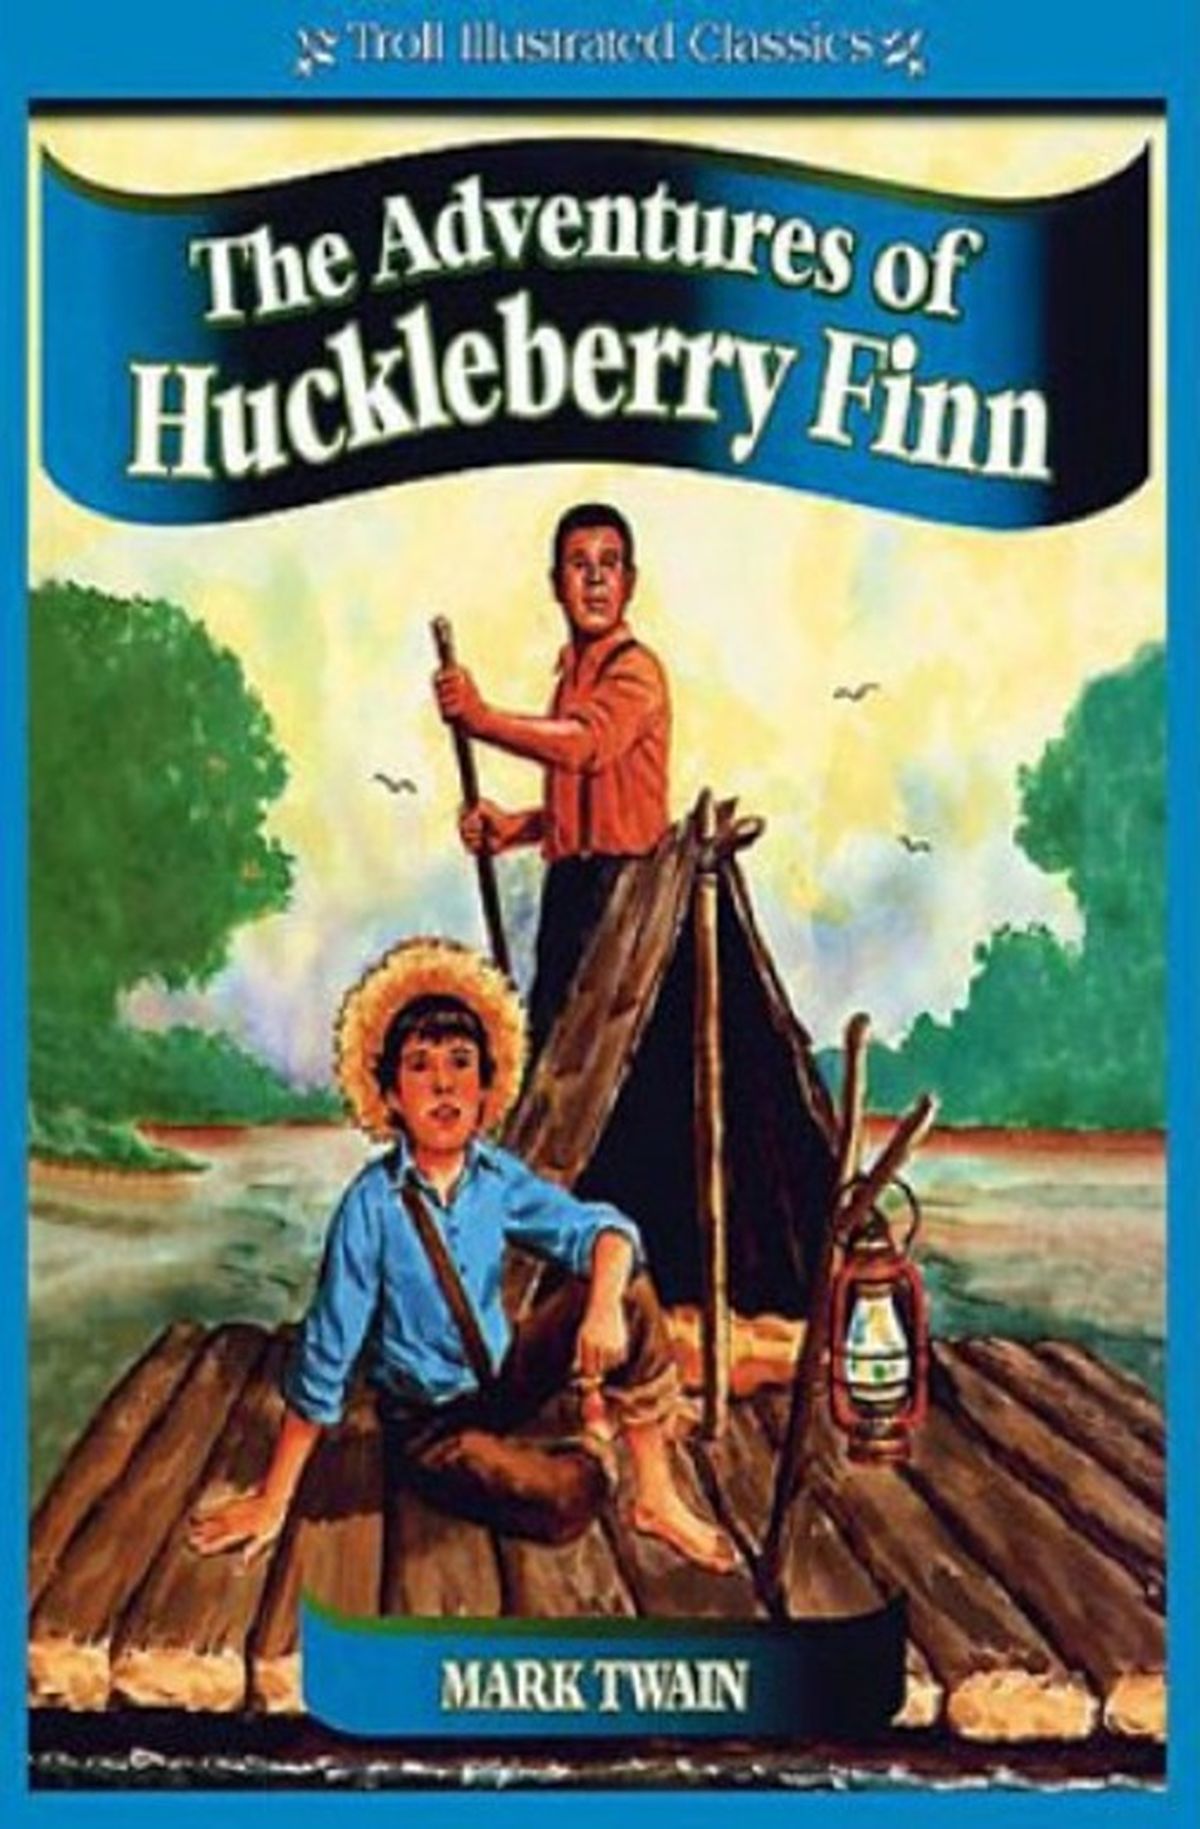 The Adventures of Huckleberry Finn for iphone download